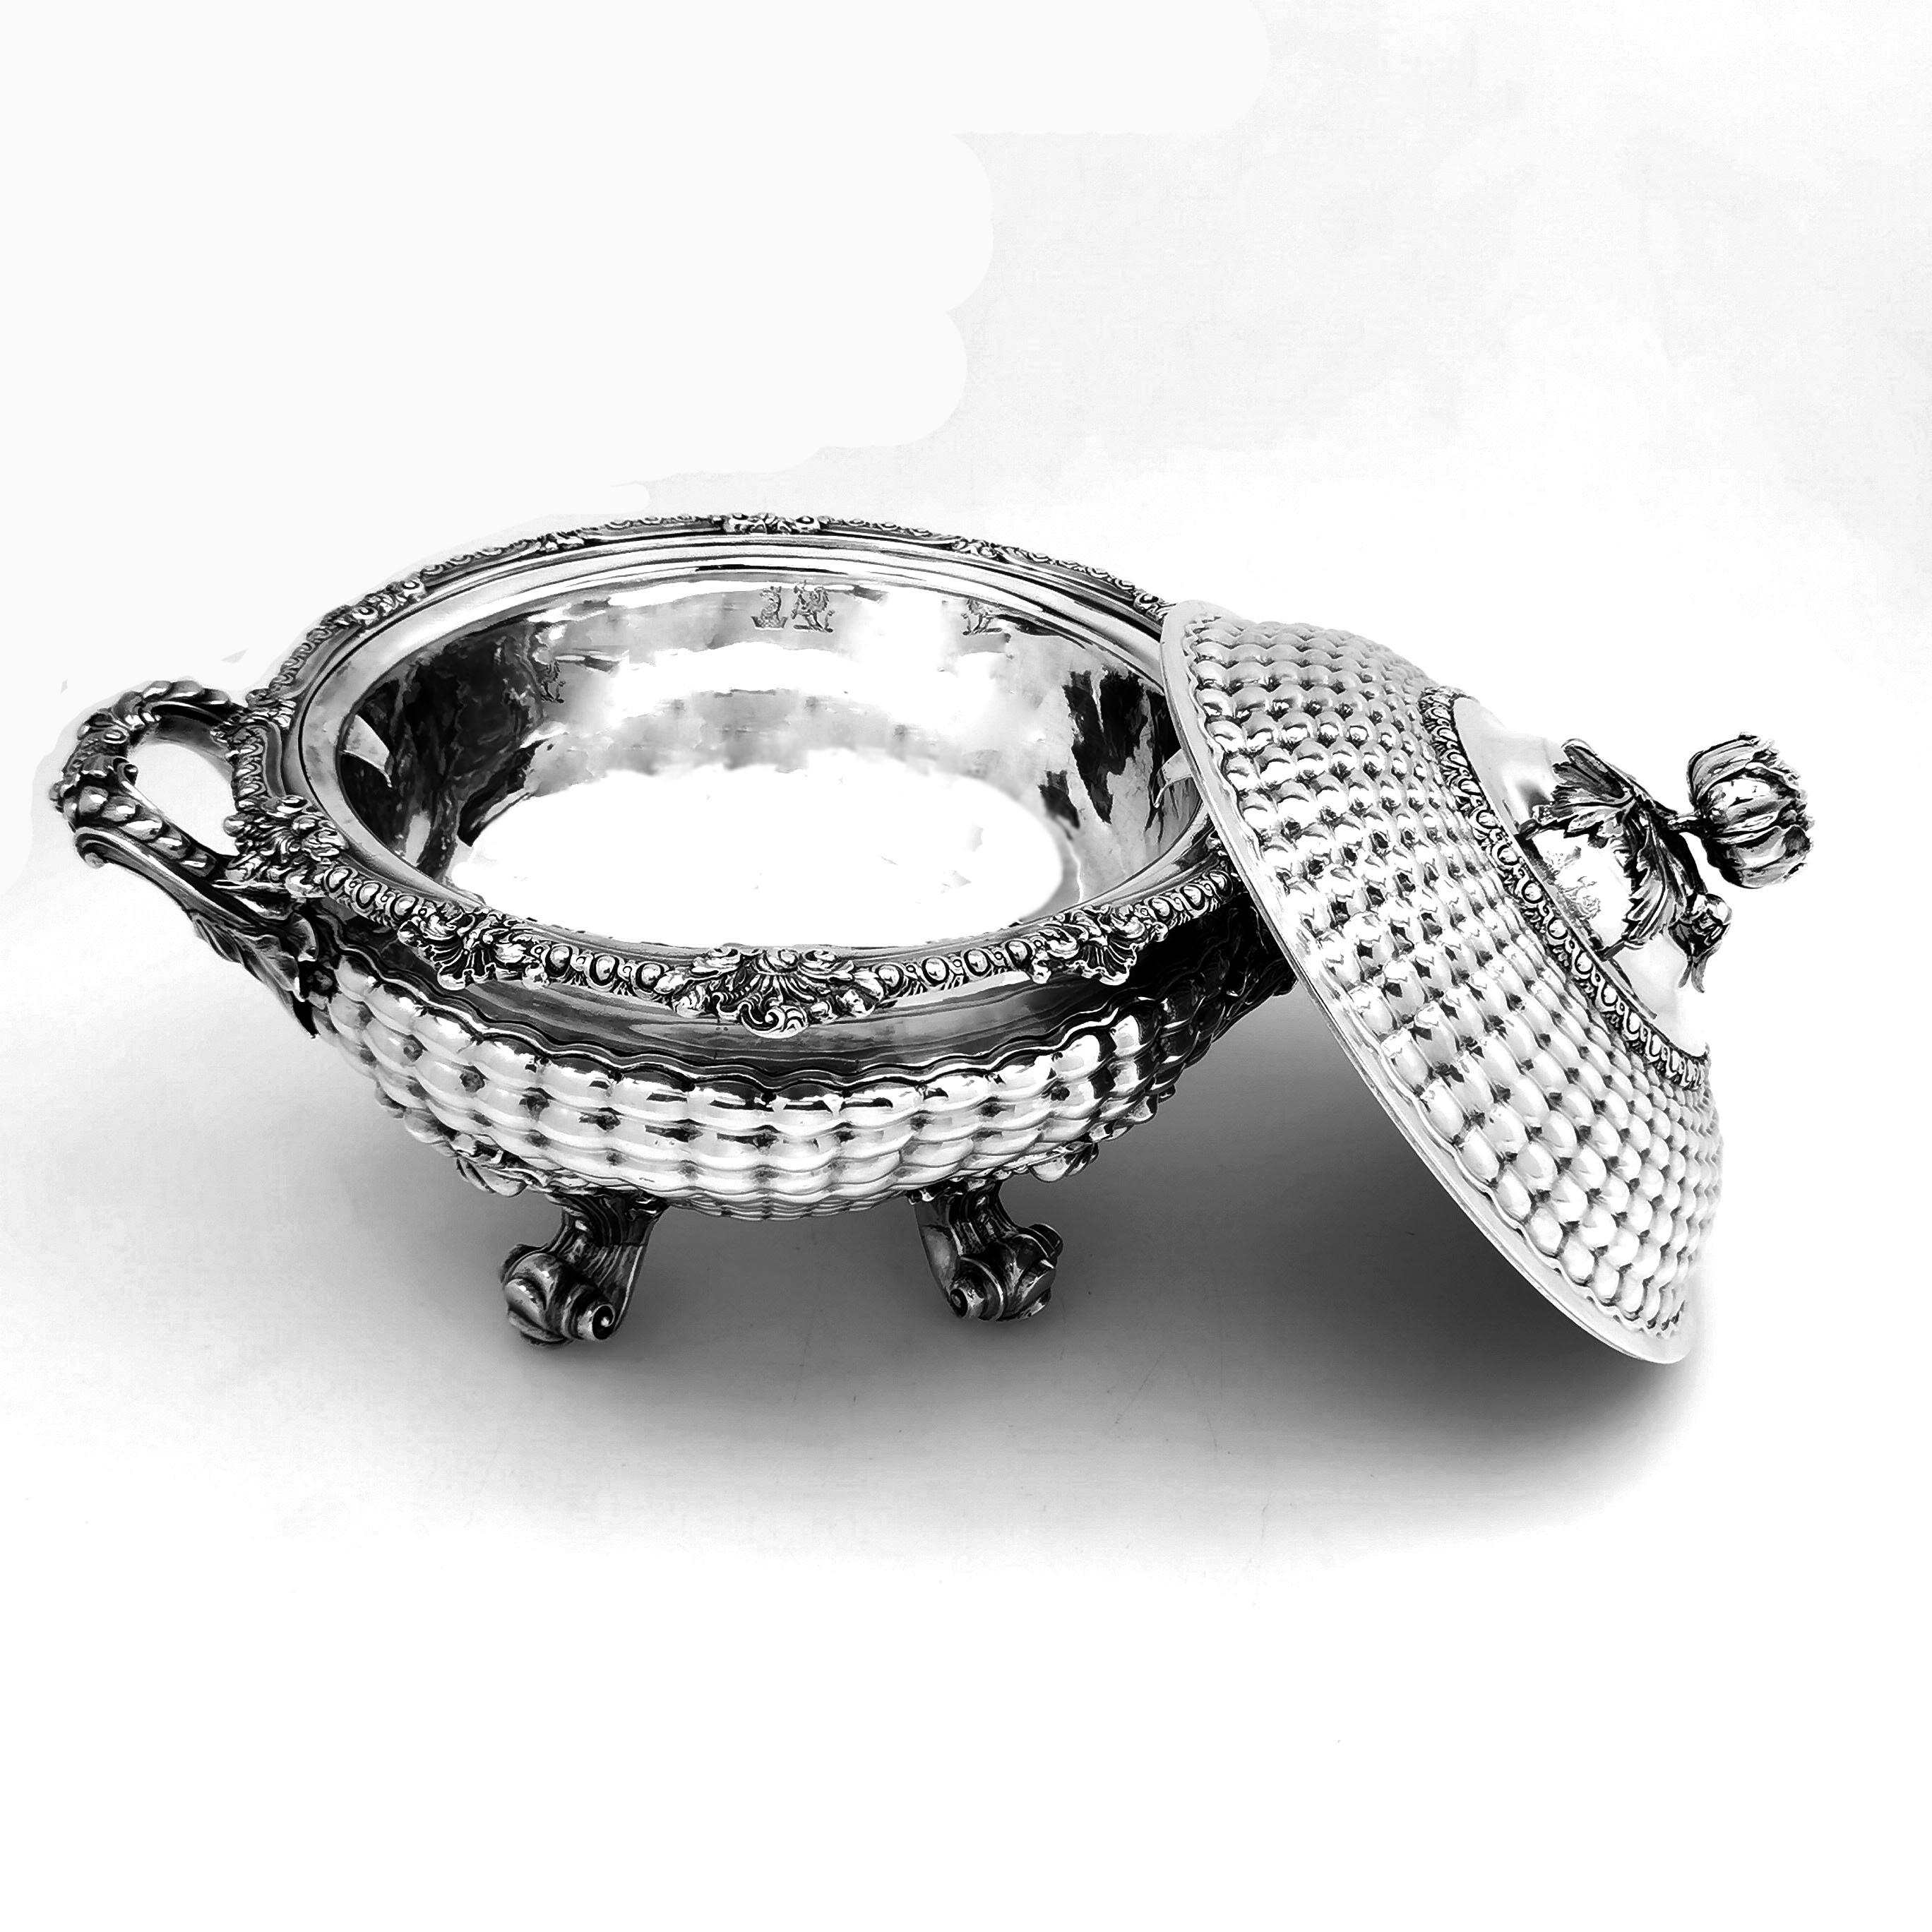 19th Century Rare Antique Georgian Sterling Silver Soup Tureen Quilted Pattern, 1827